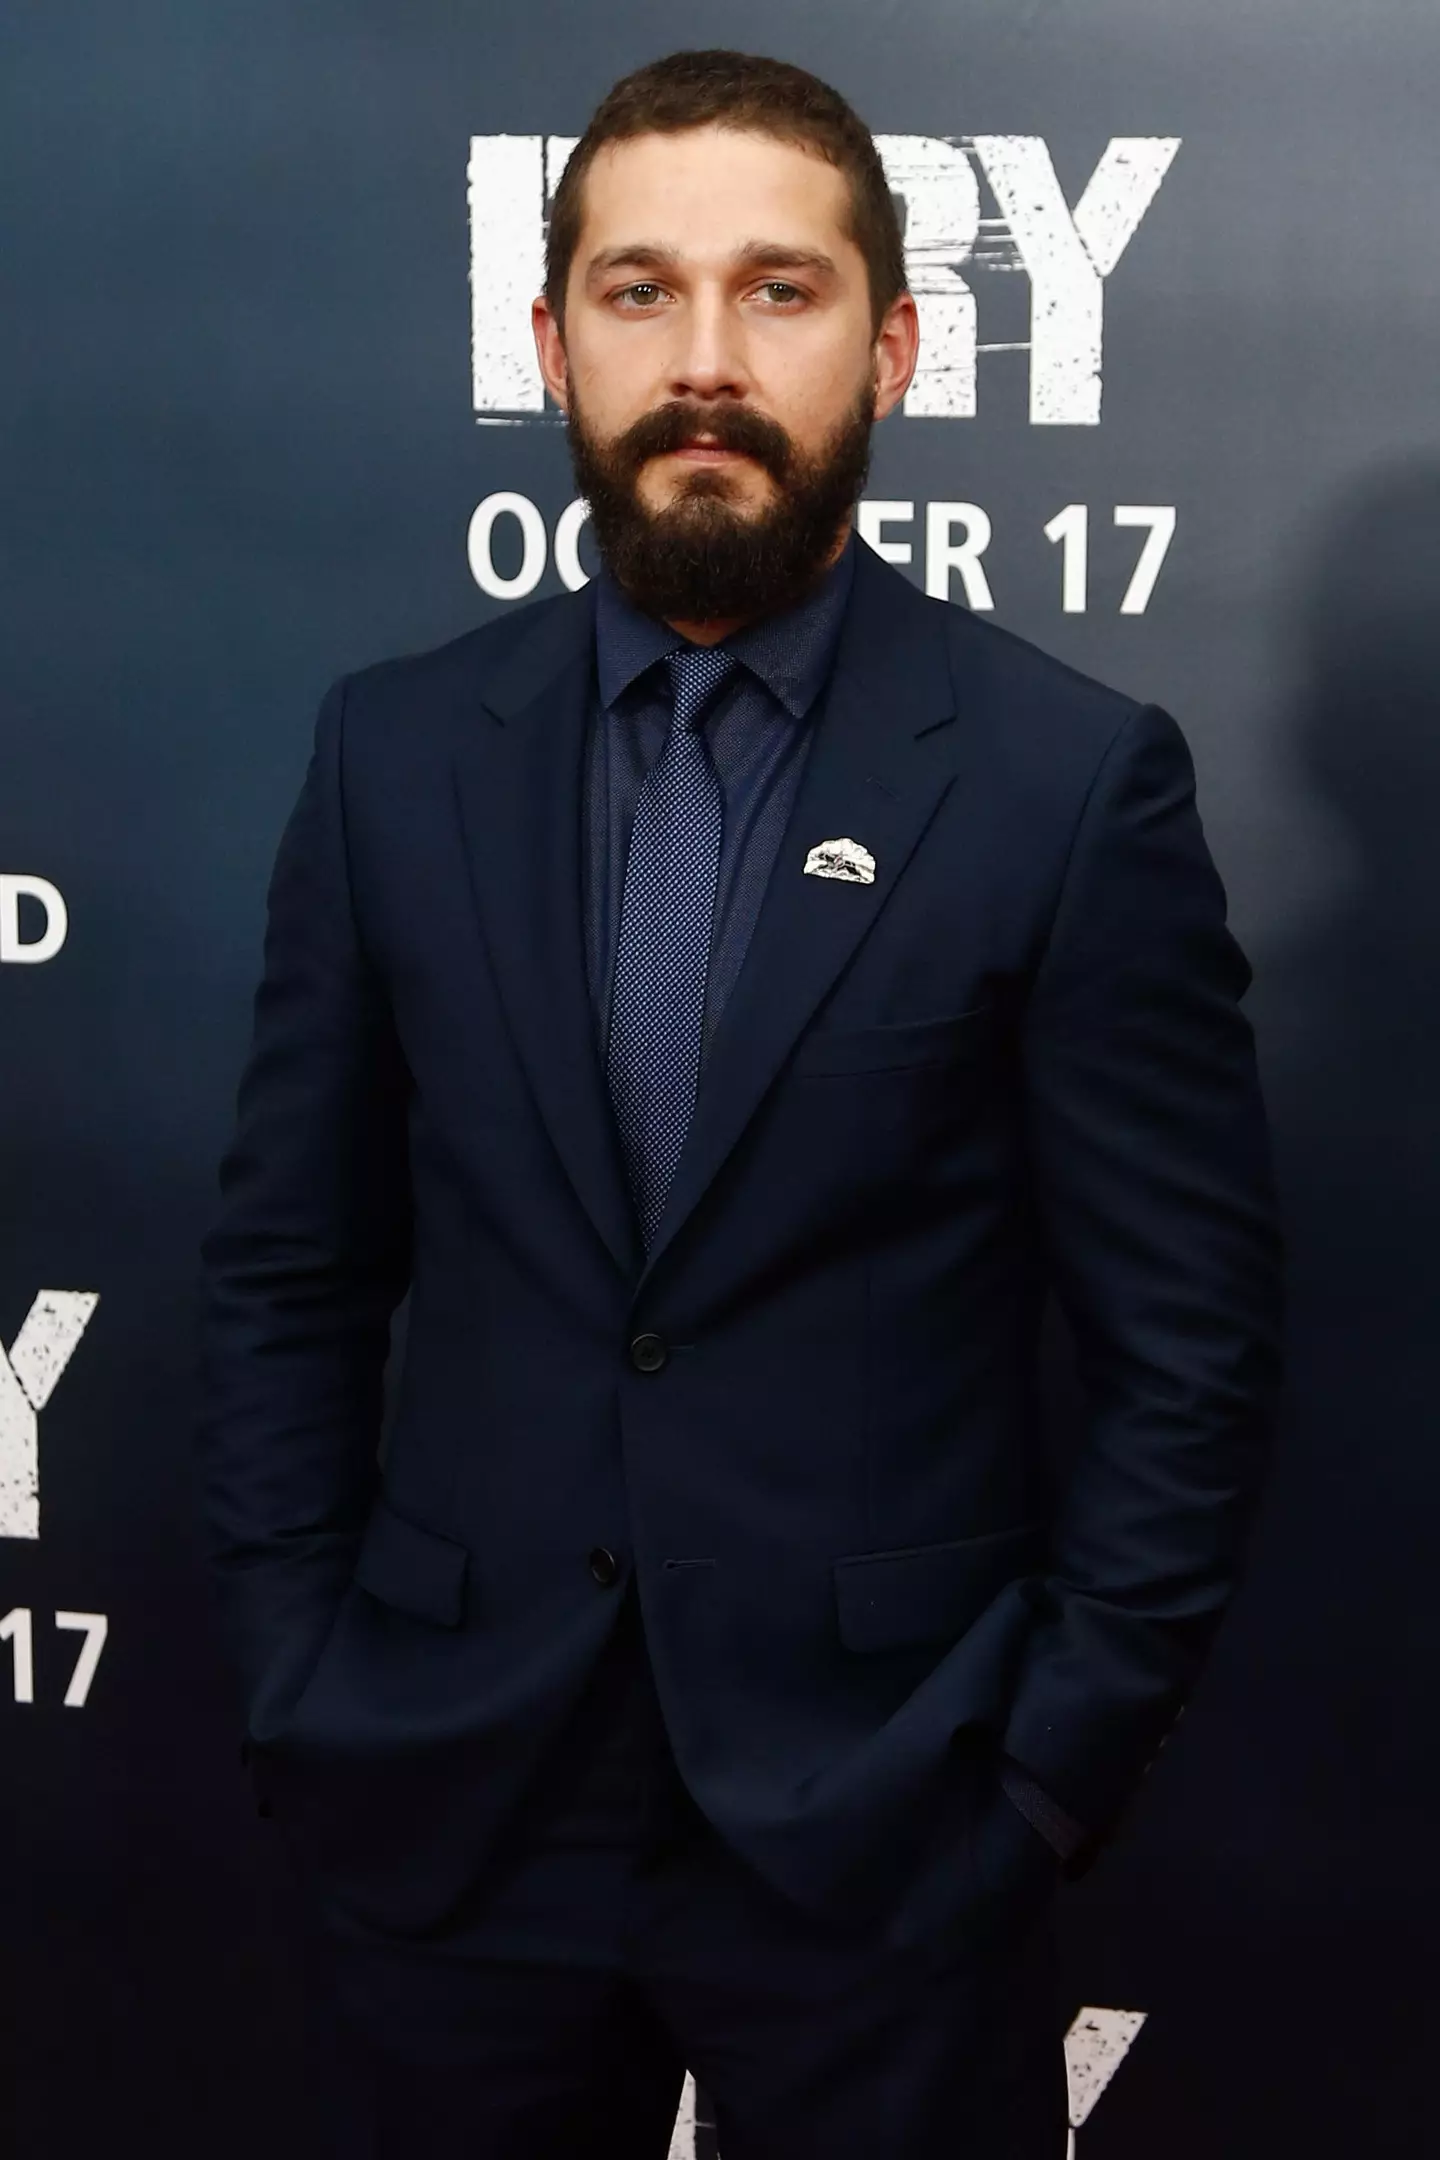 Shia LaBeouf has responded to claims he was sacked from Olivia Wilde's movie Don't Worry Darling.